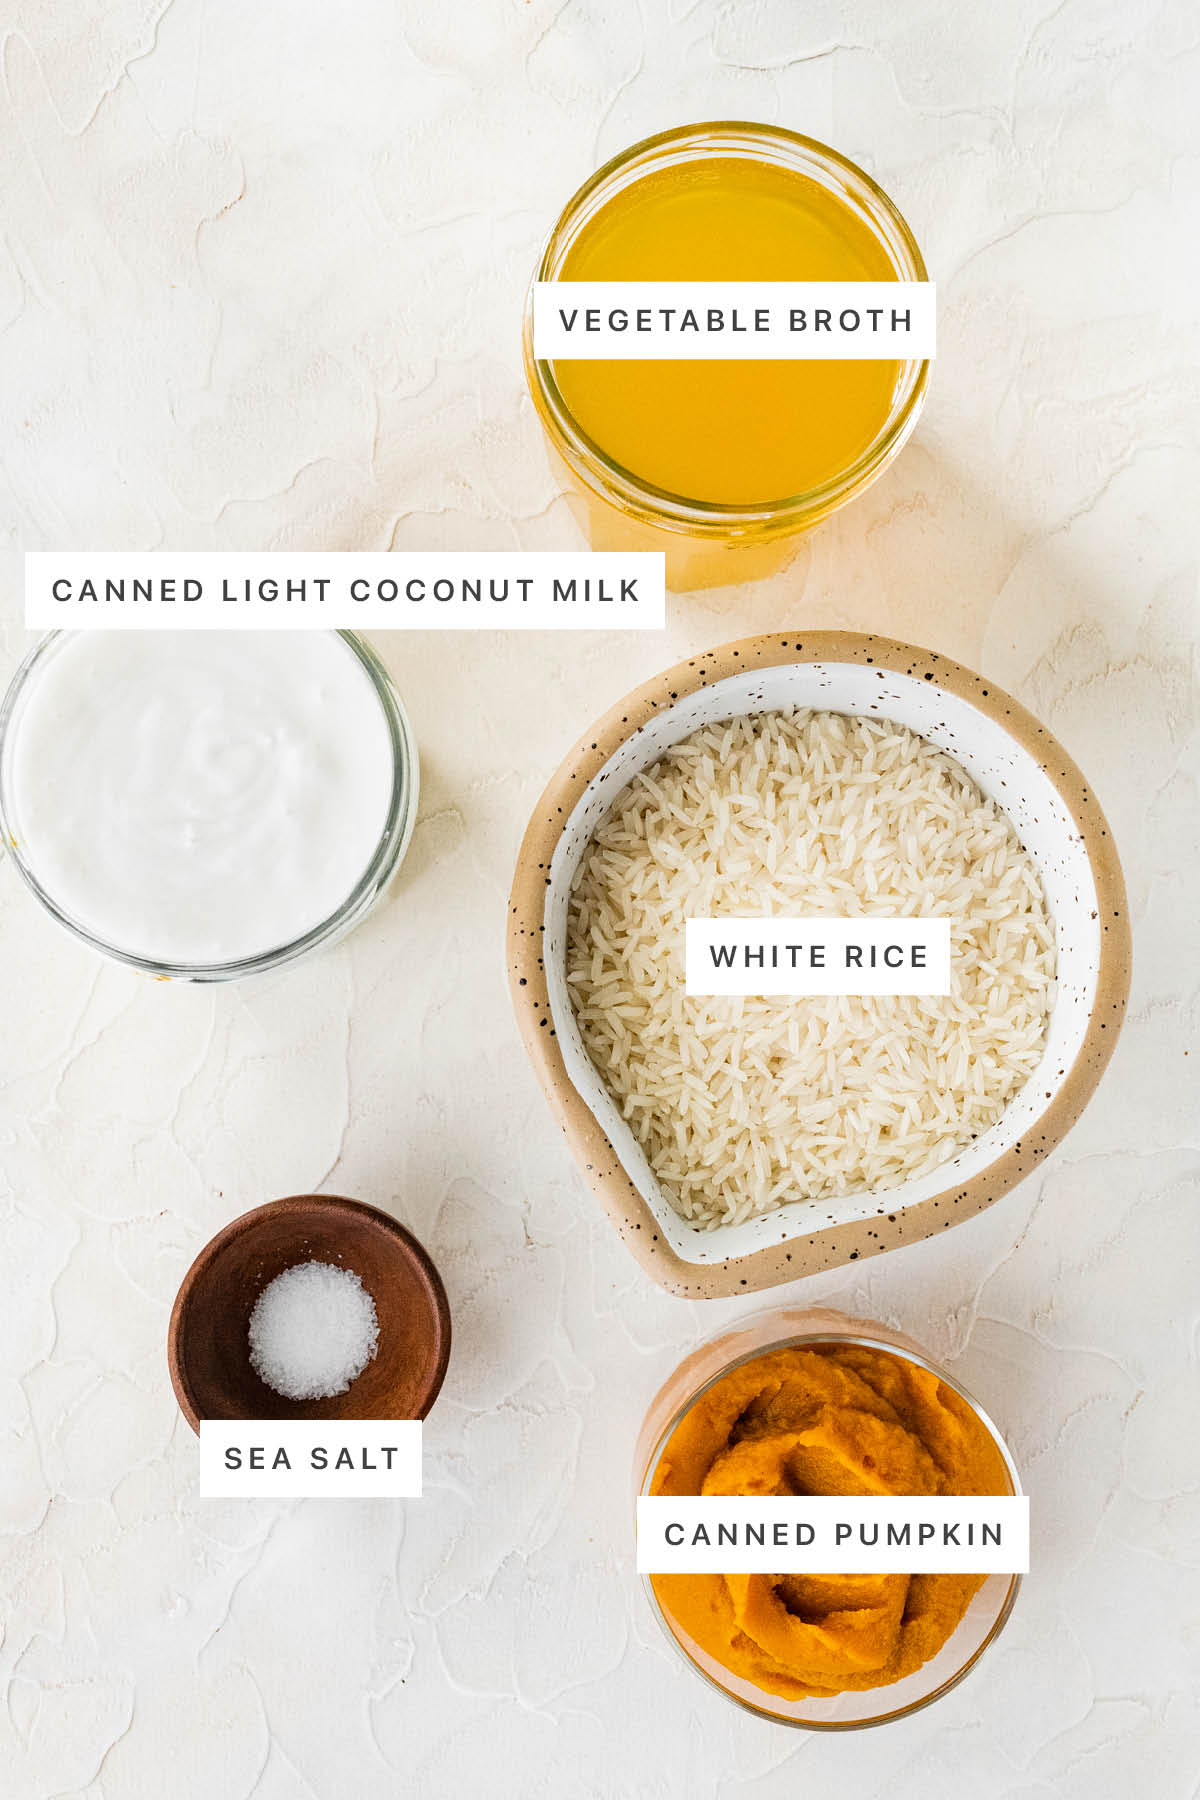 Ingredients measured out to make Pumpkin Rice: vegetable broth, coconut milk, white rice, sea salt and canned pumpkin.